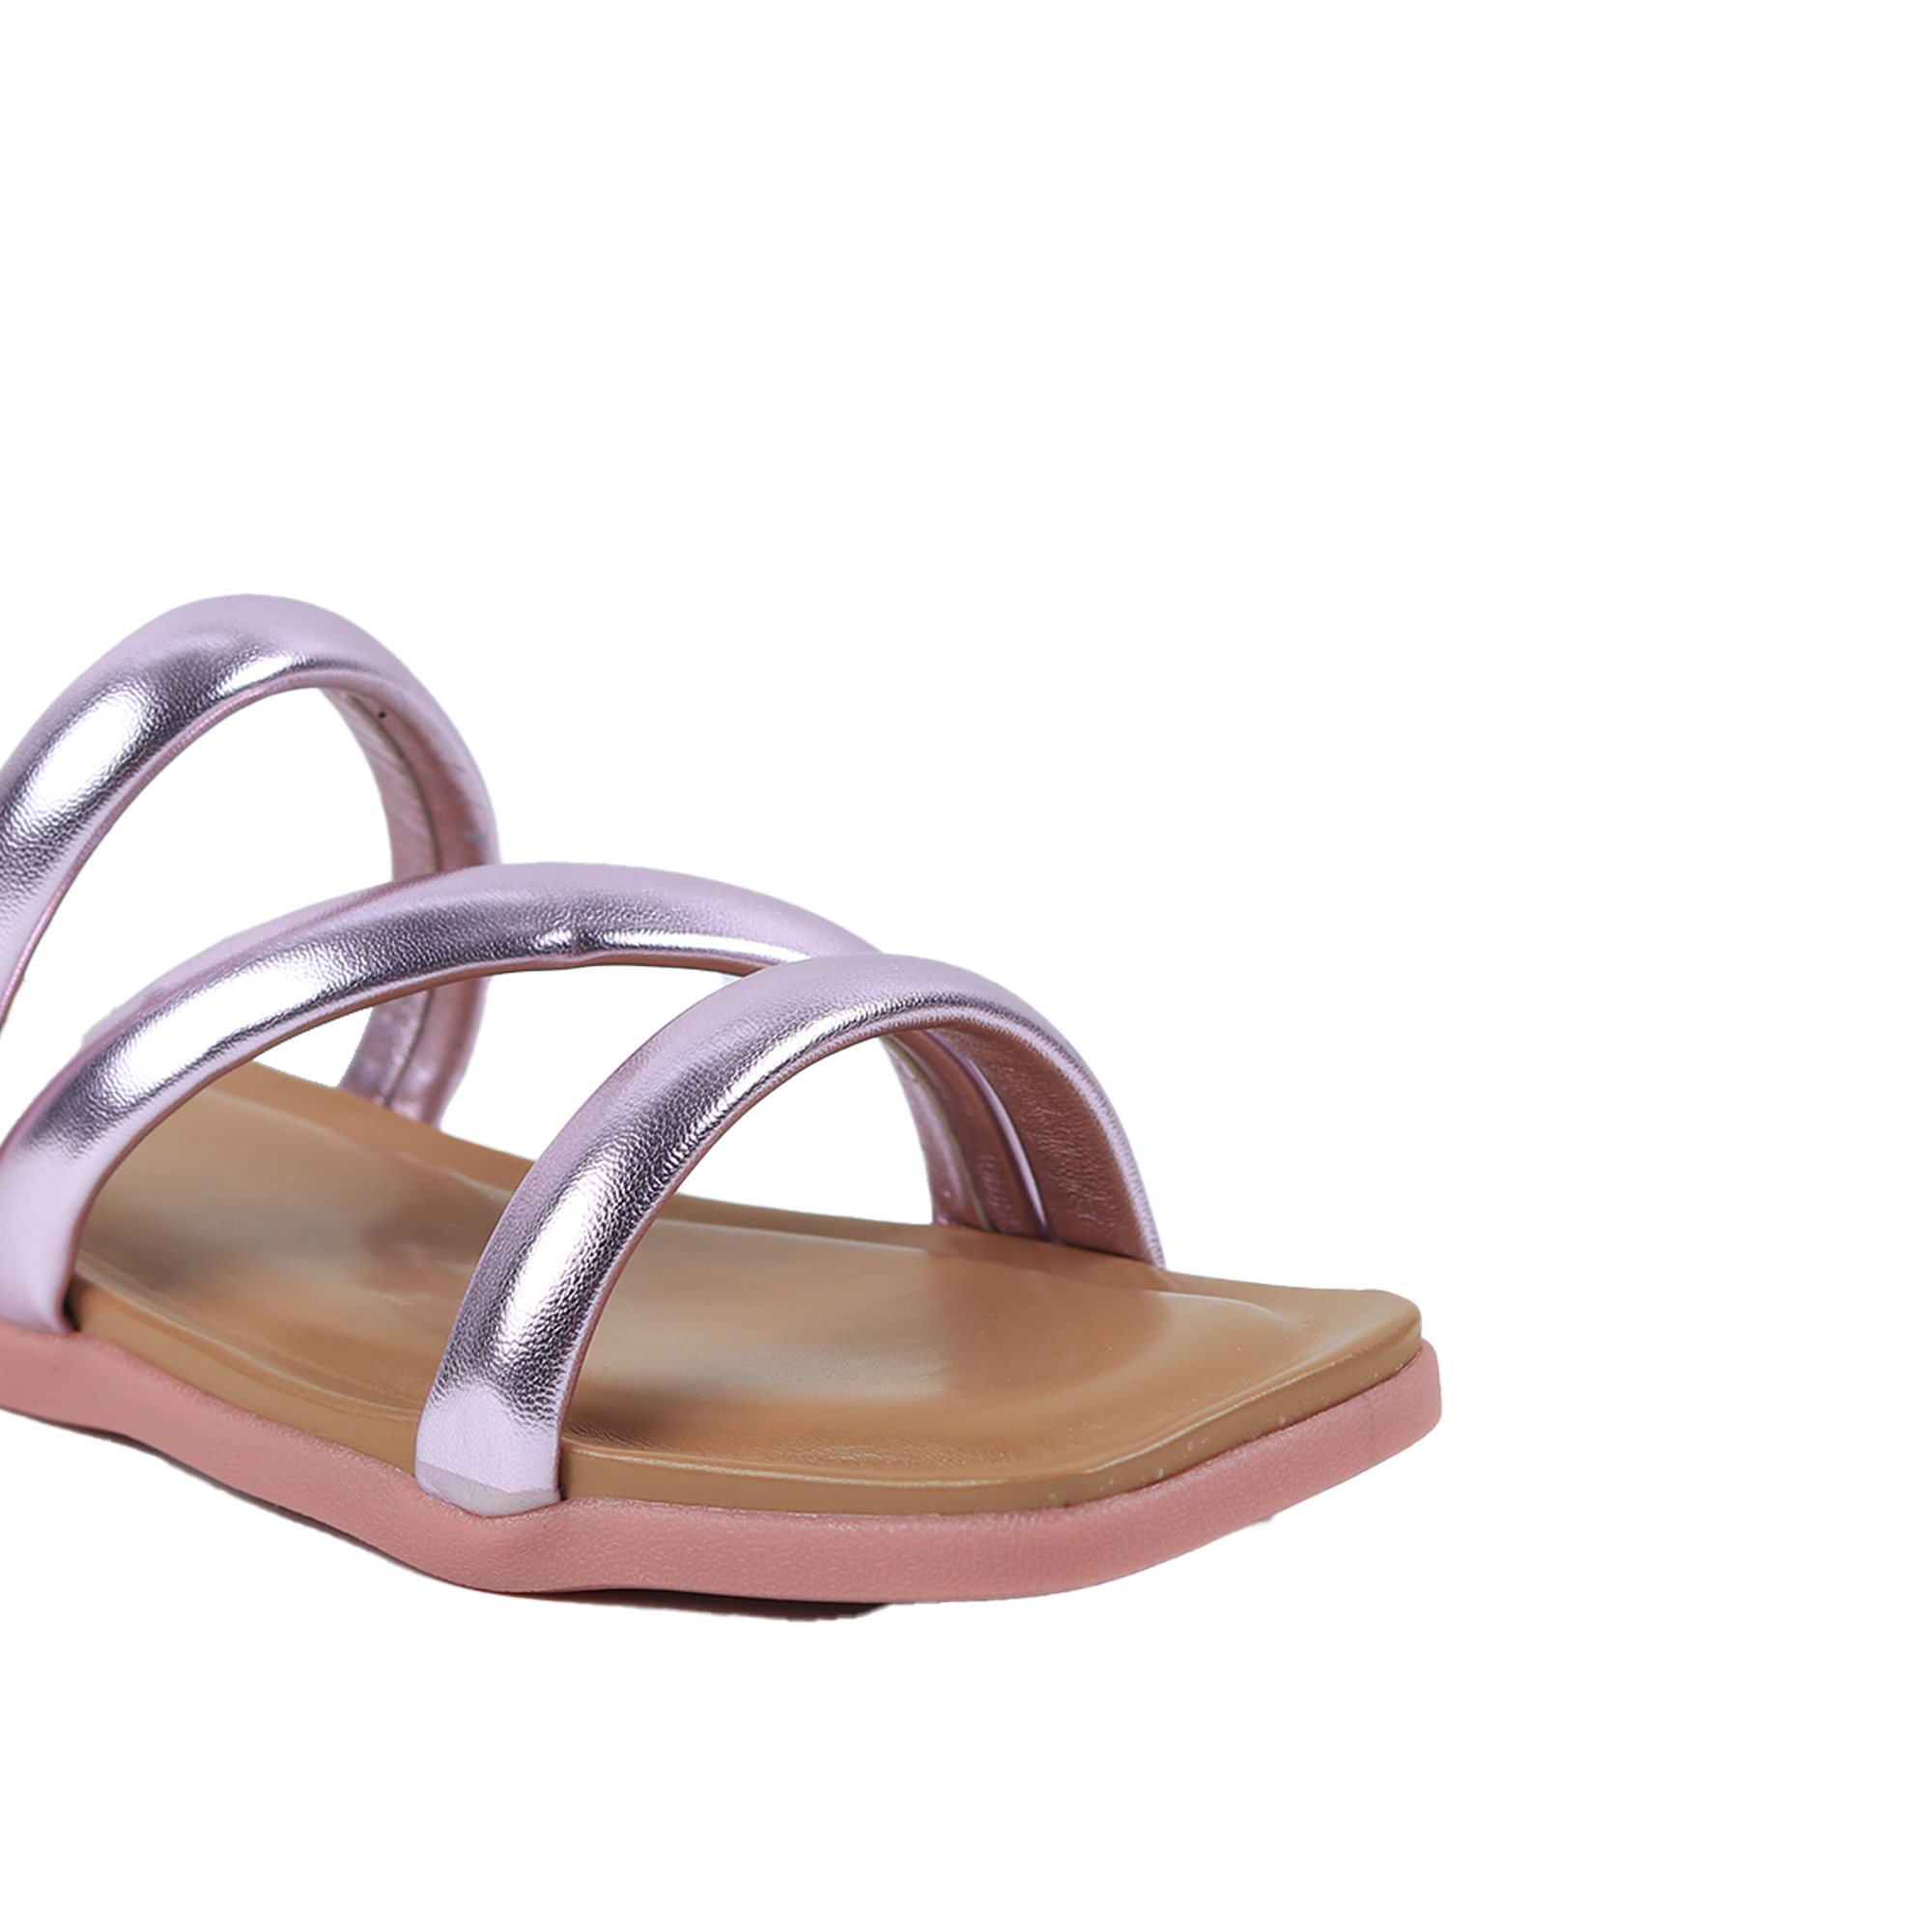 Fashionable Sandals Silver